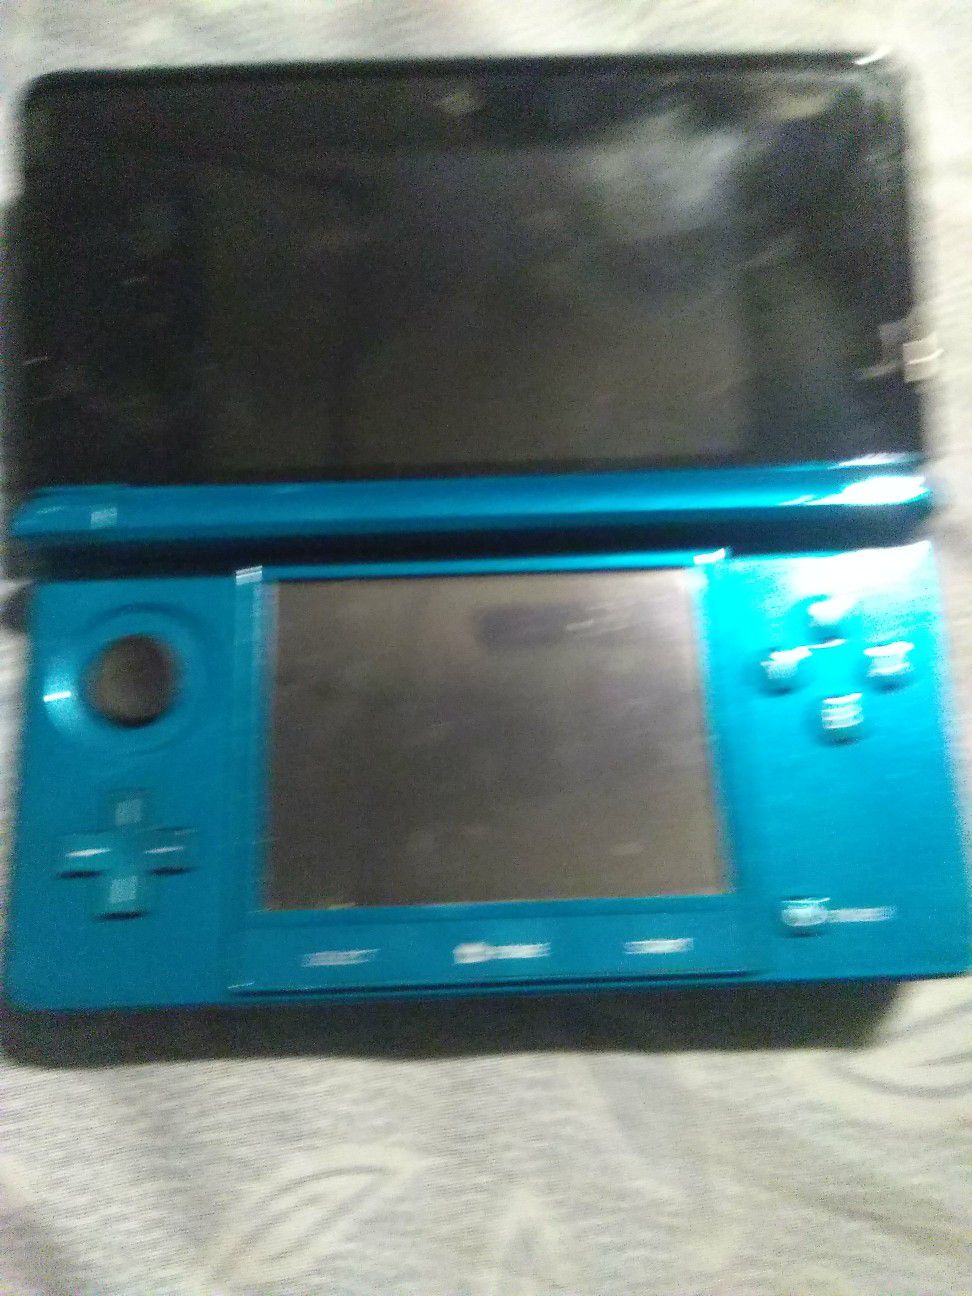 Nintendo 3DS ( no charger )